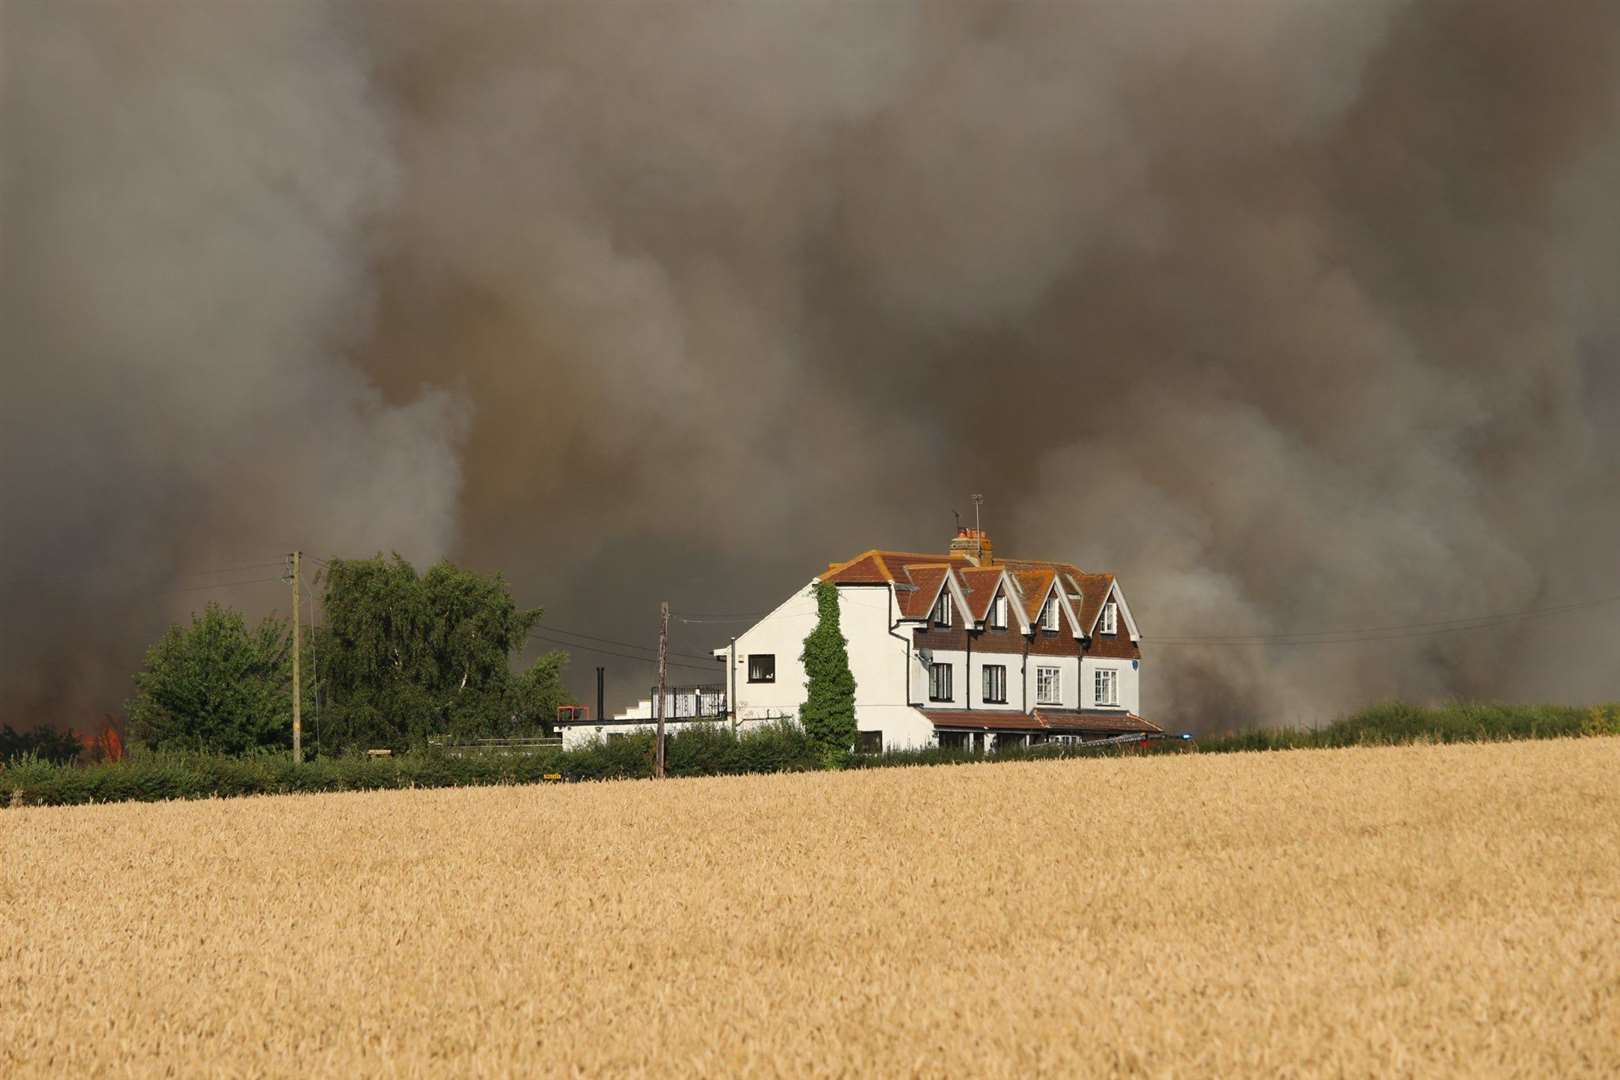 Neighbours reported being evacuated from nearby properties while fire crews tackled the blaze. Photo: Paul Aspinall